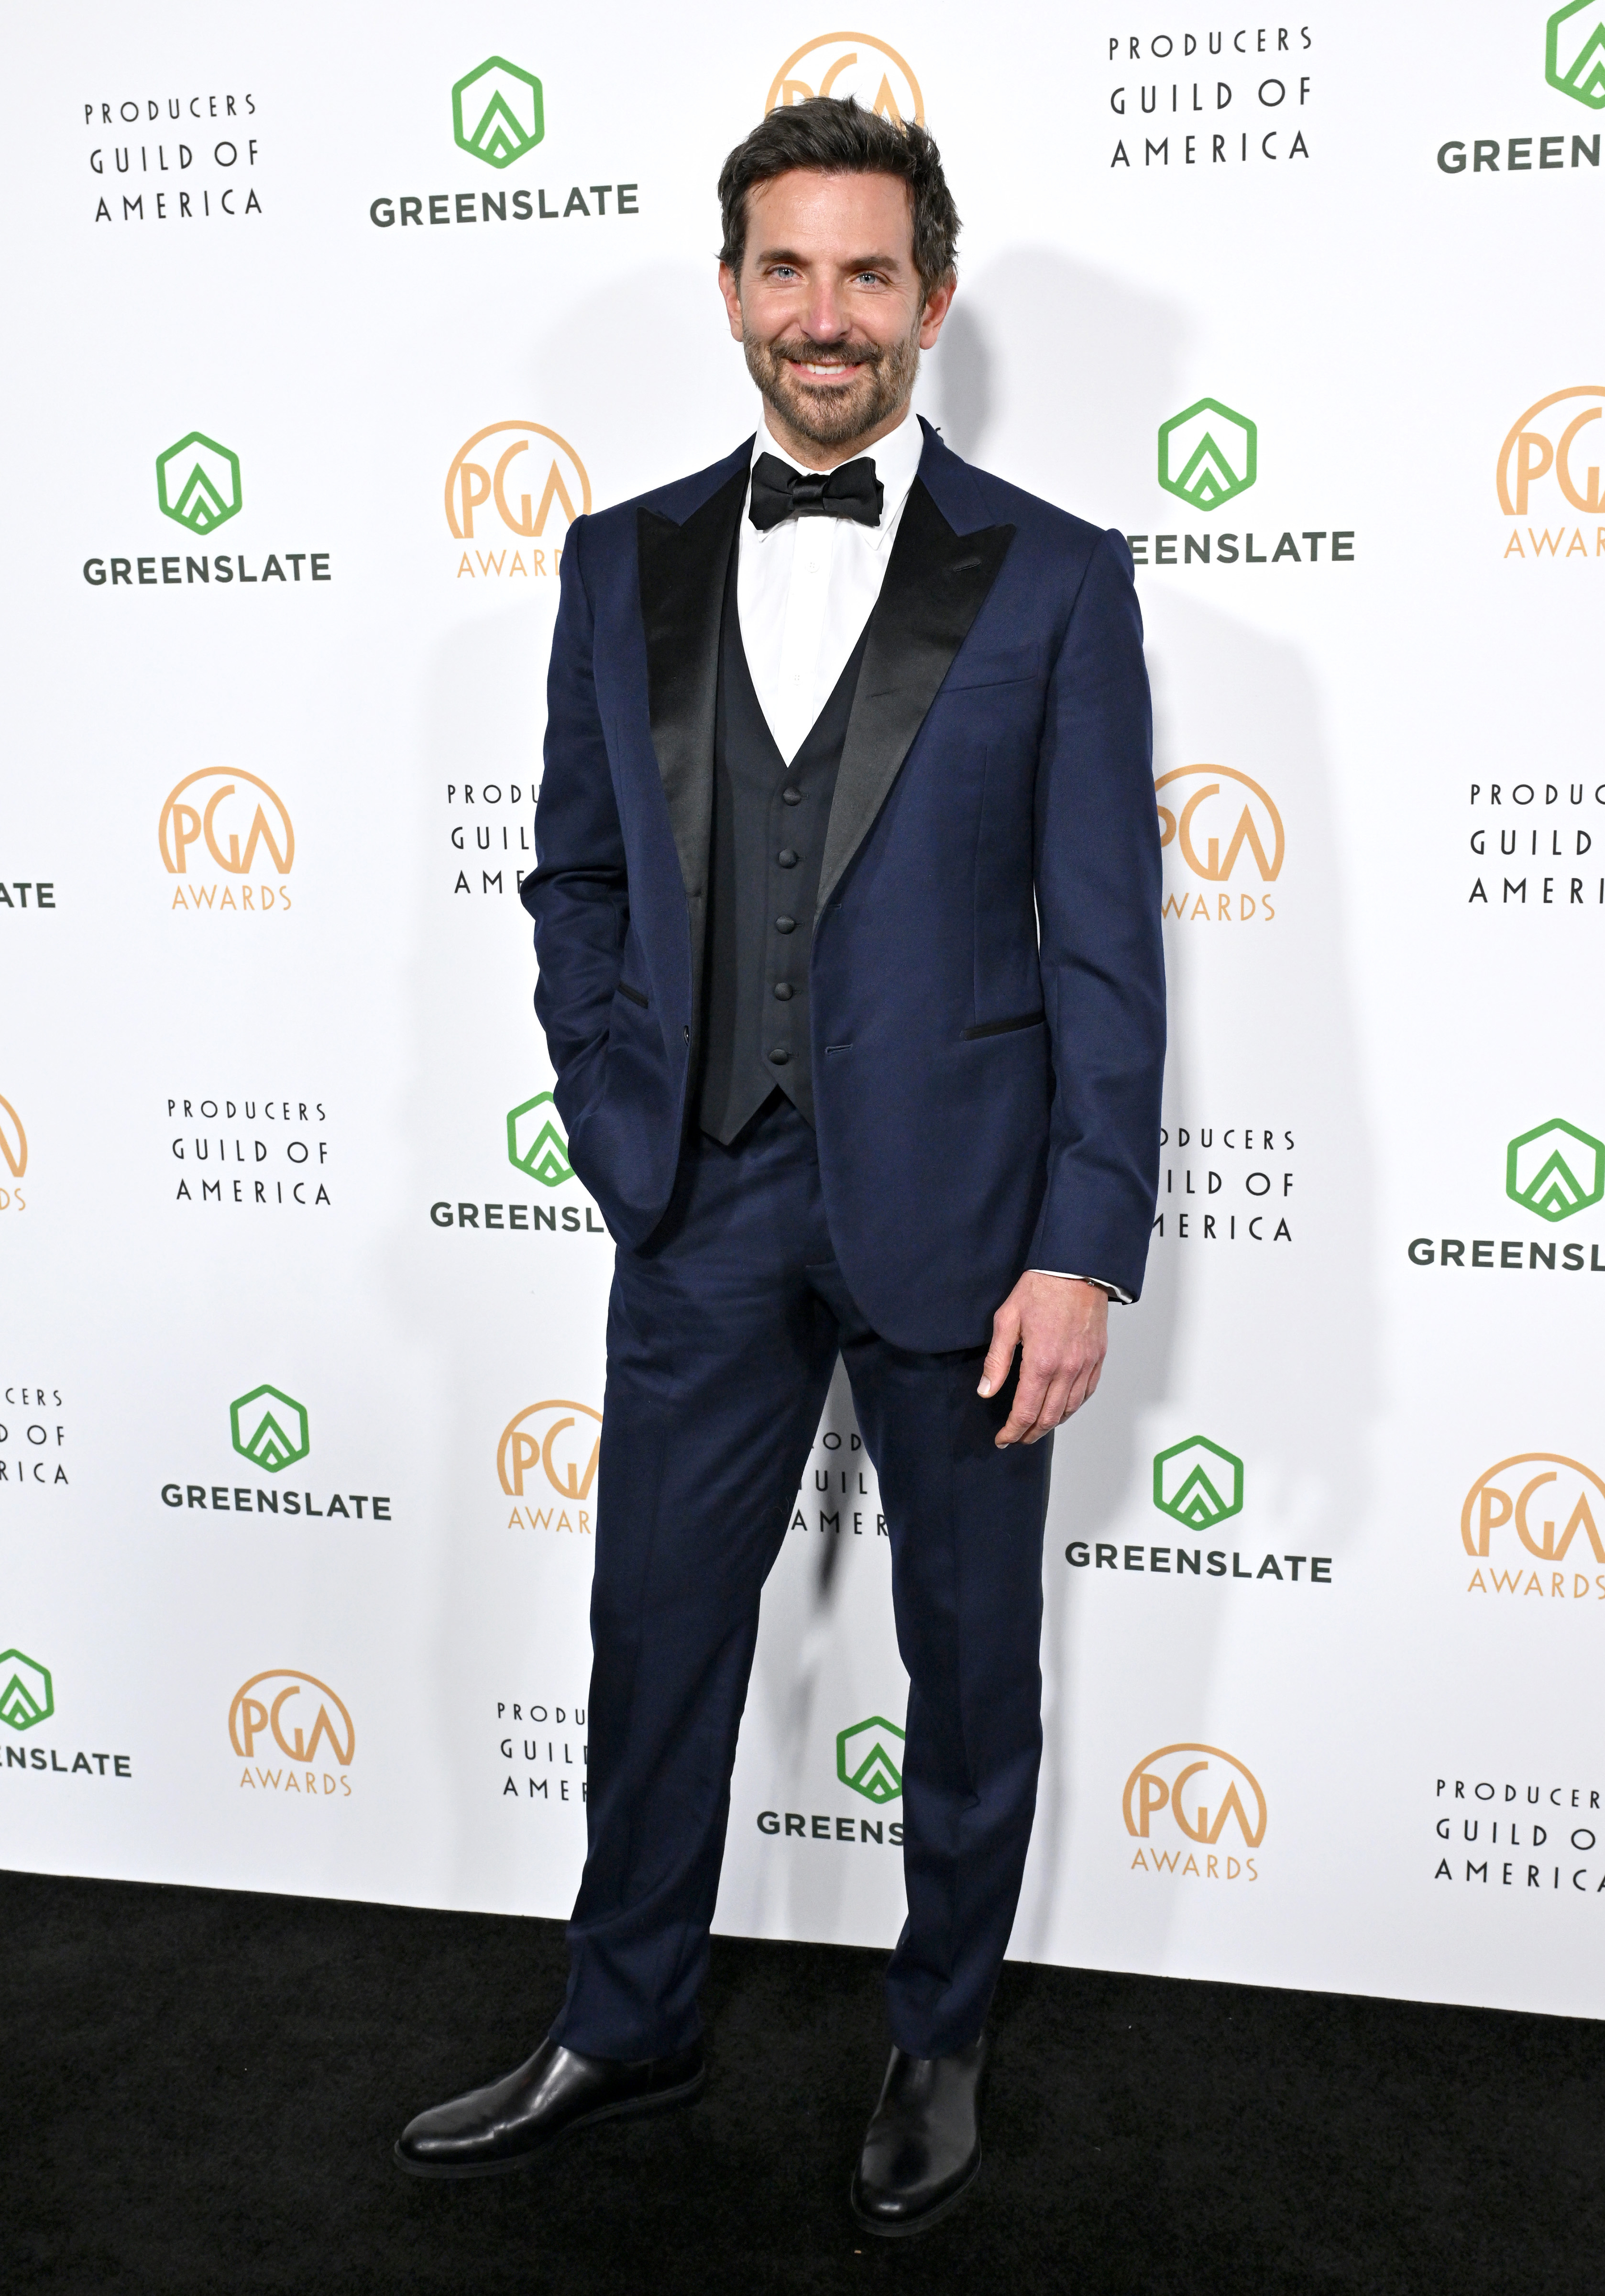 Bradley in a tuxedo with bow tie posing at the Producers Guild Awards